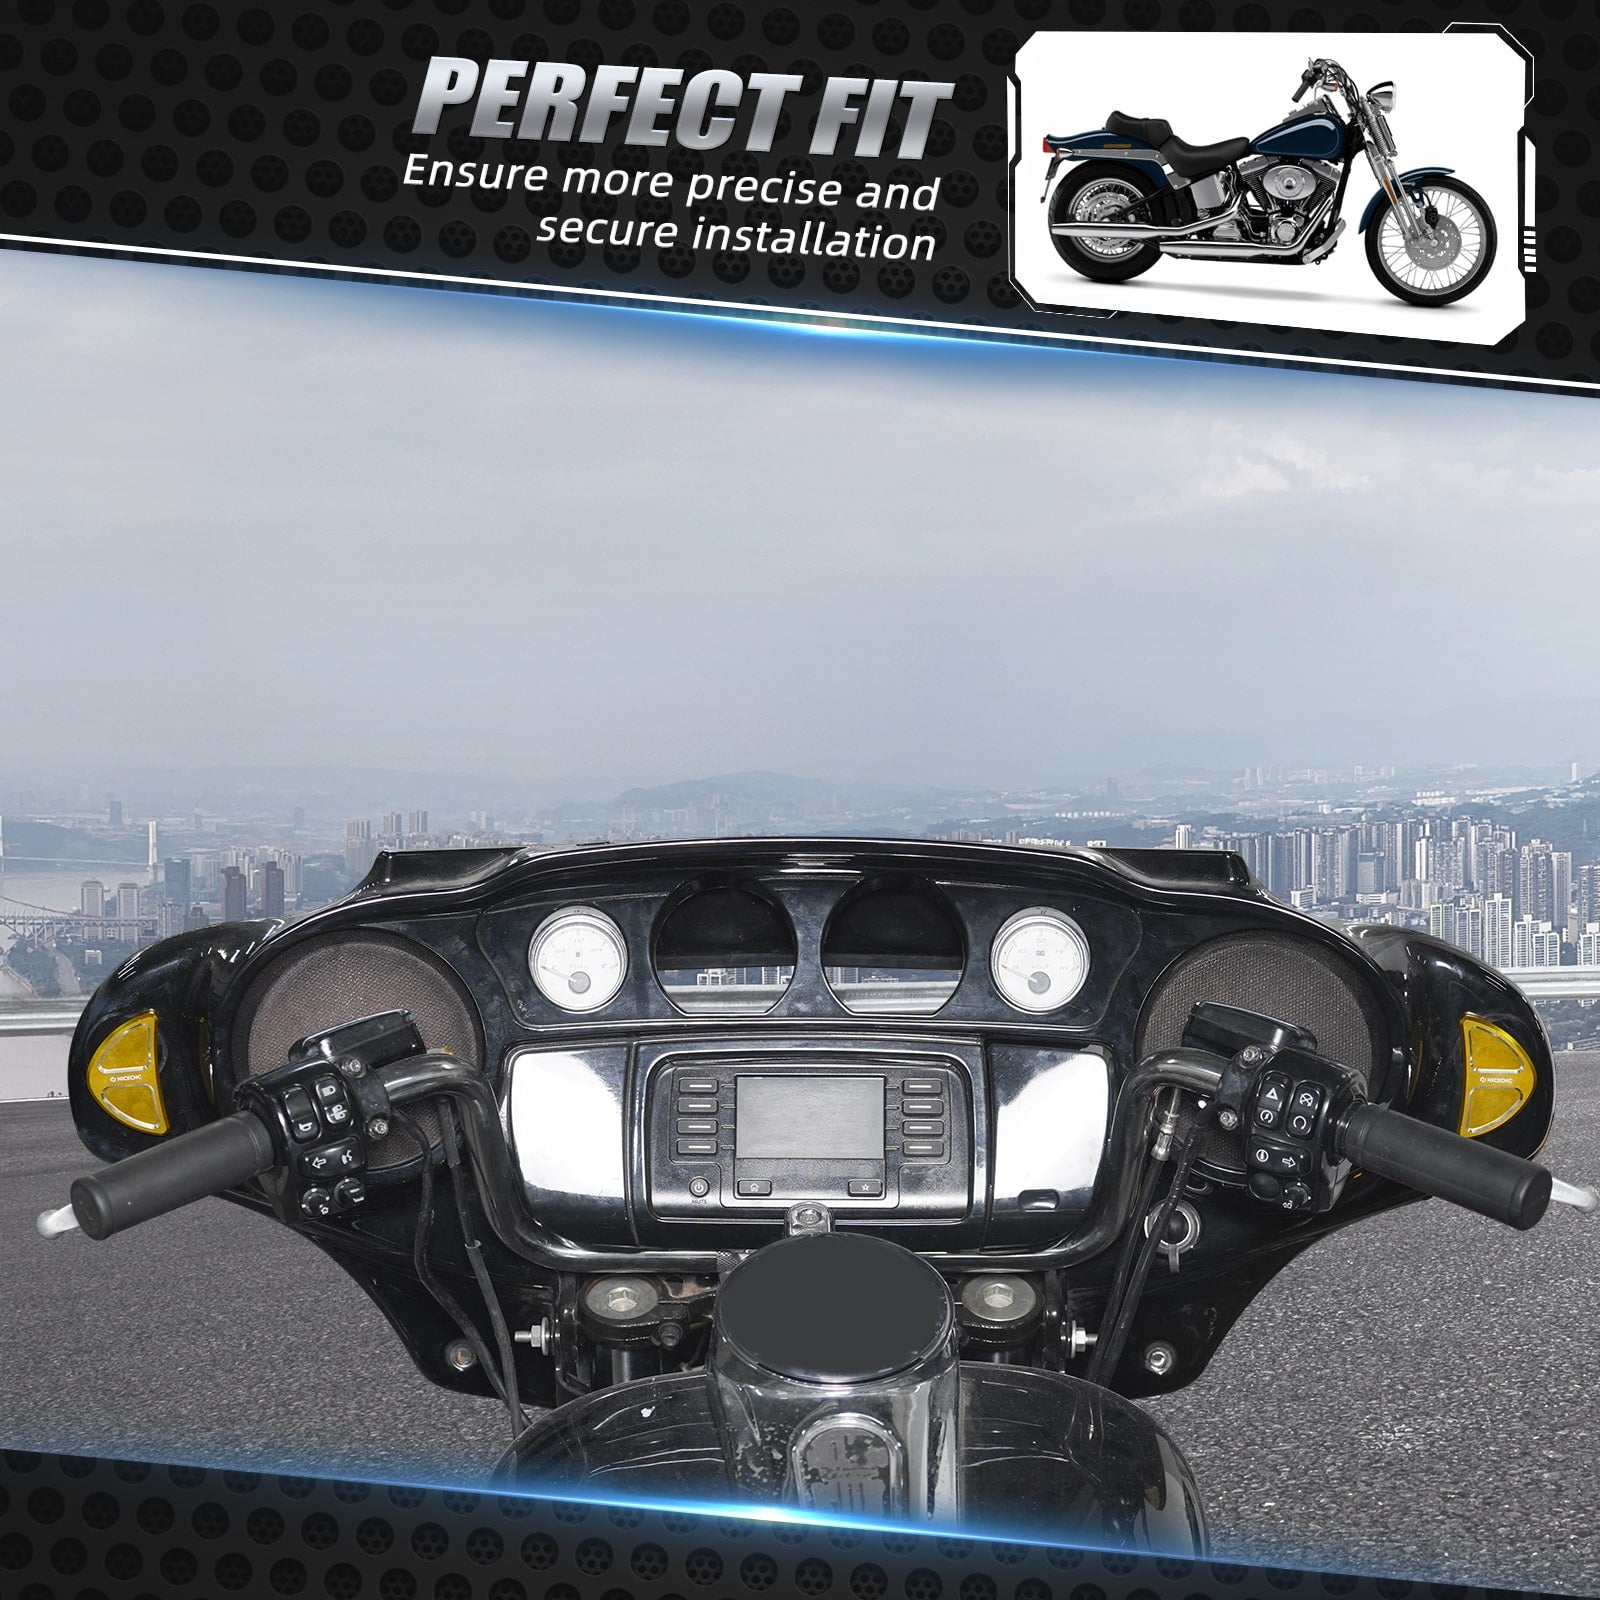 Batwing Fairing Mirror Hole Inserts Plugs Covers Caps For Harley Davidson Street Glide FLHX 2014-2023